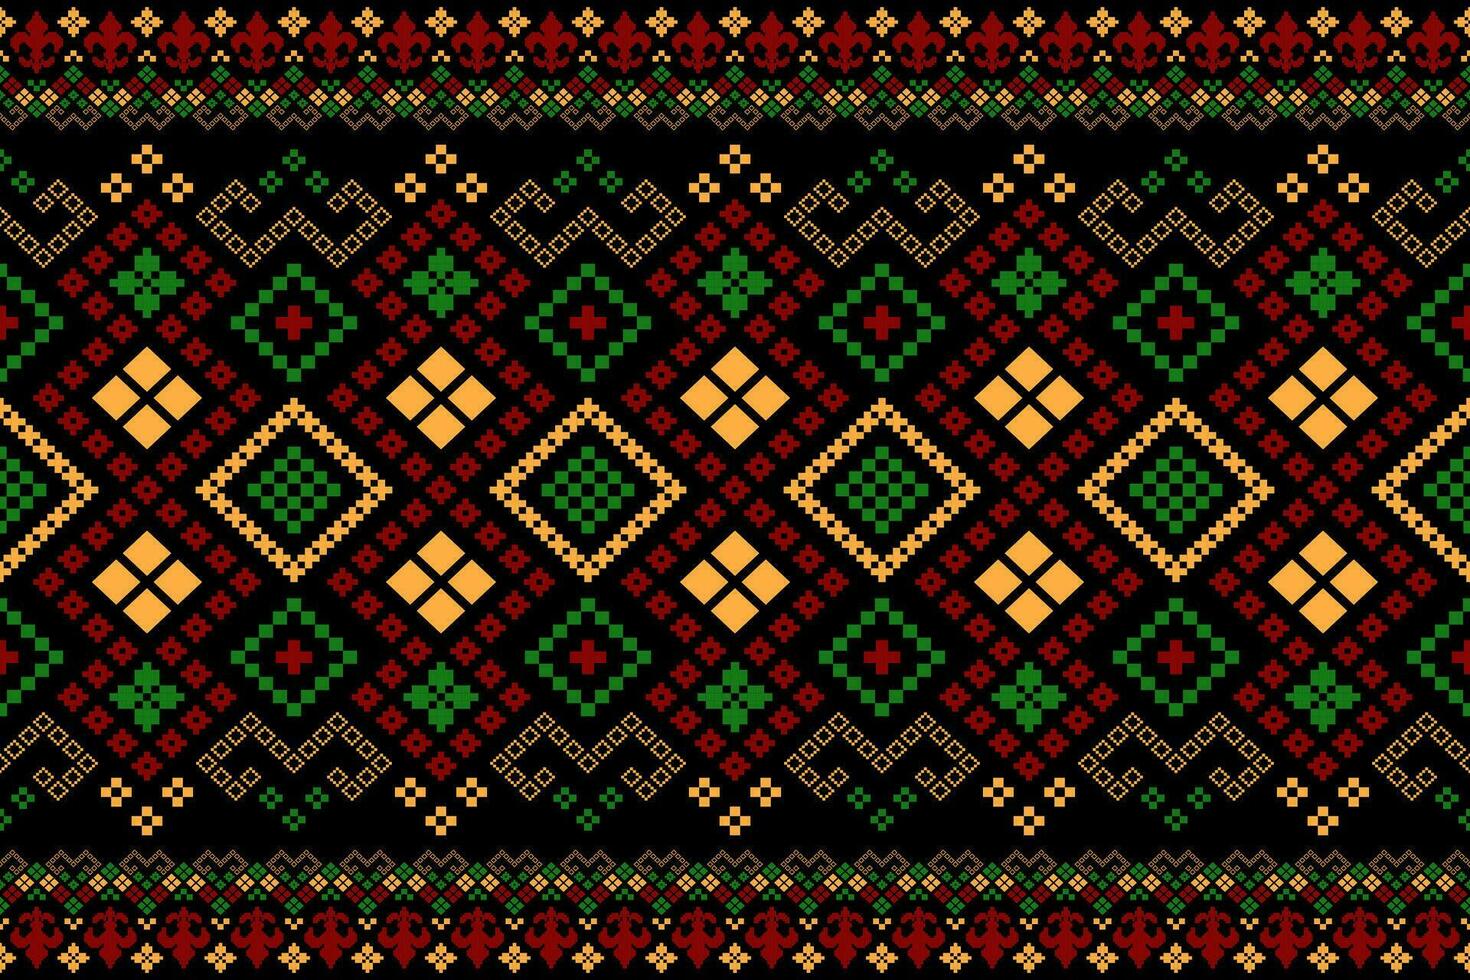 Cross stitch colorful geometric traditional ethnic pattern Ikat seamless pattern abstract design for fabric print cloth dress carpet curtains and sarong Aztec African Indian Indonesian vector